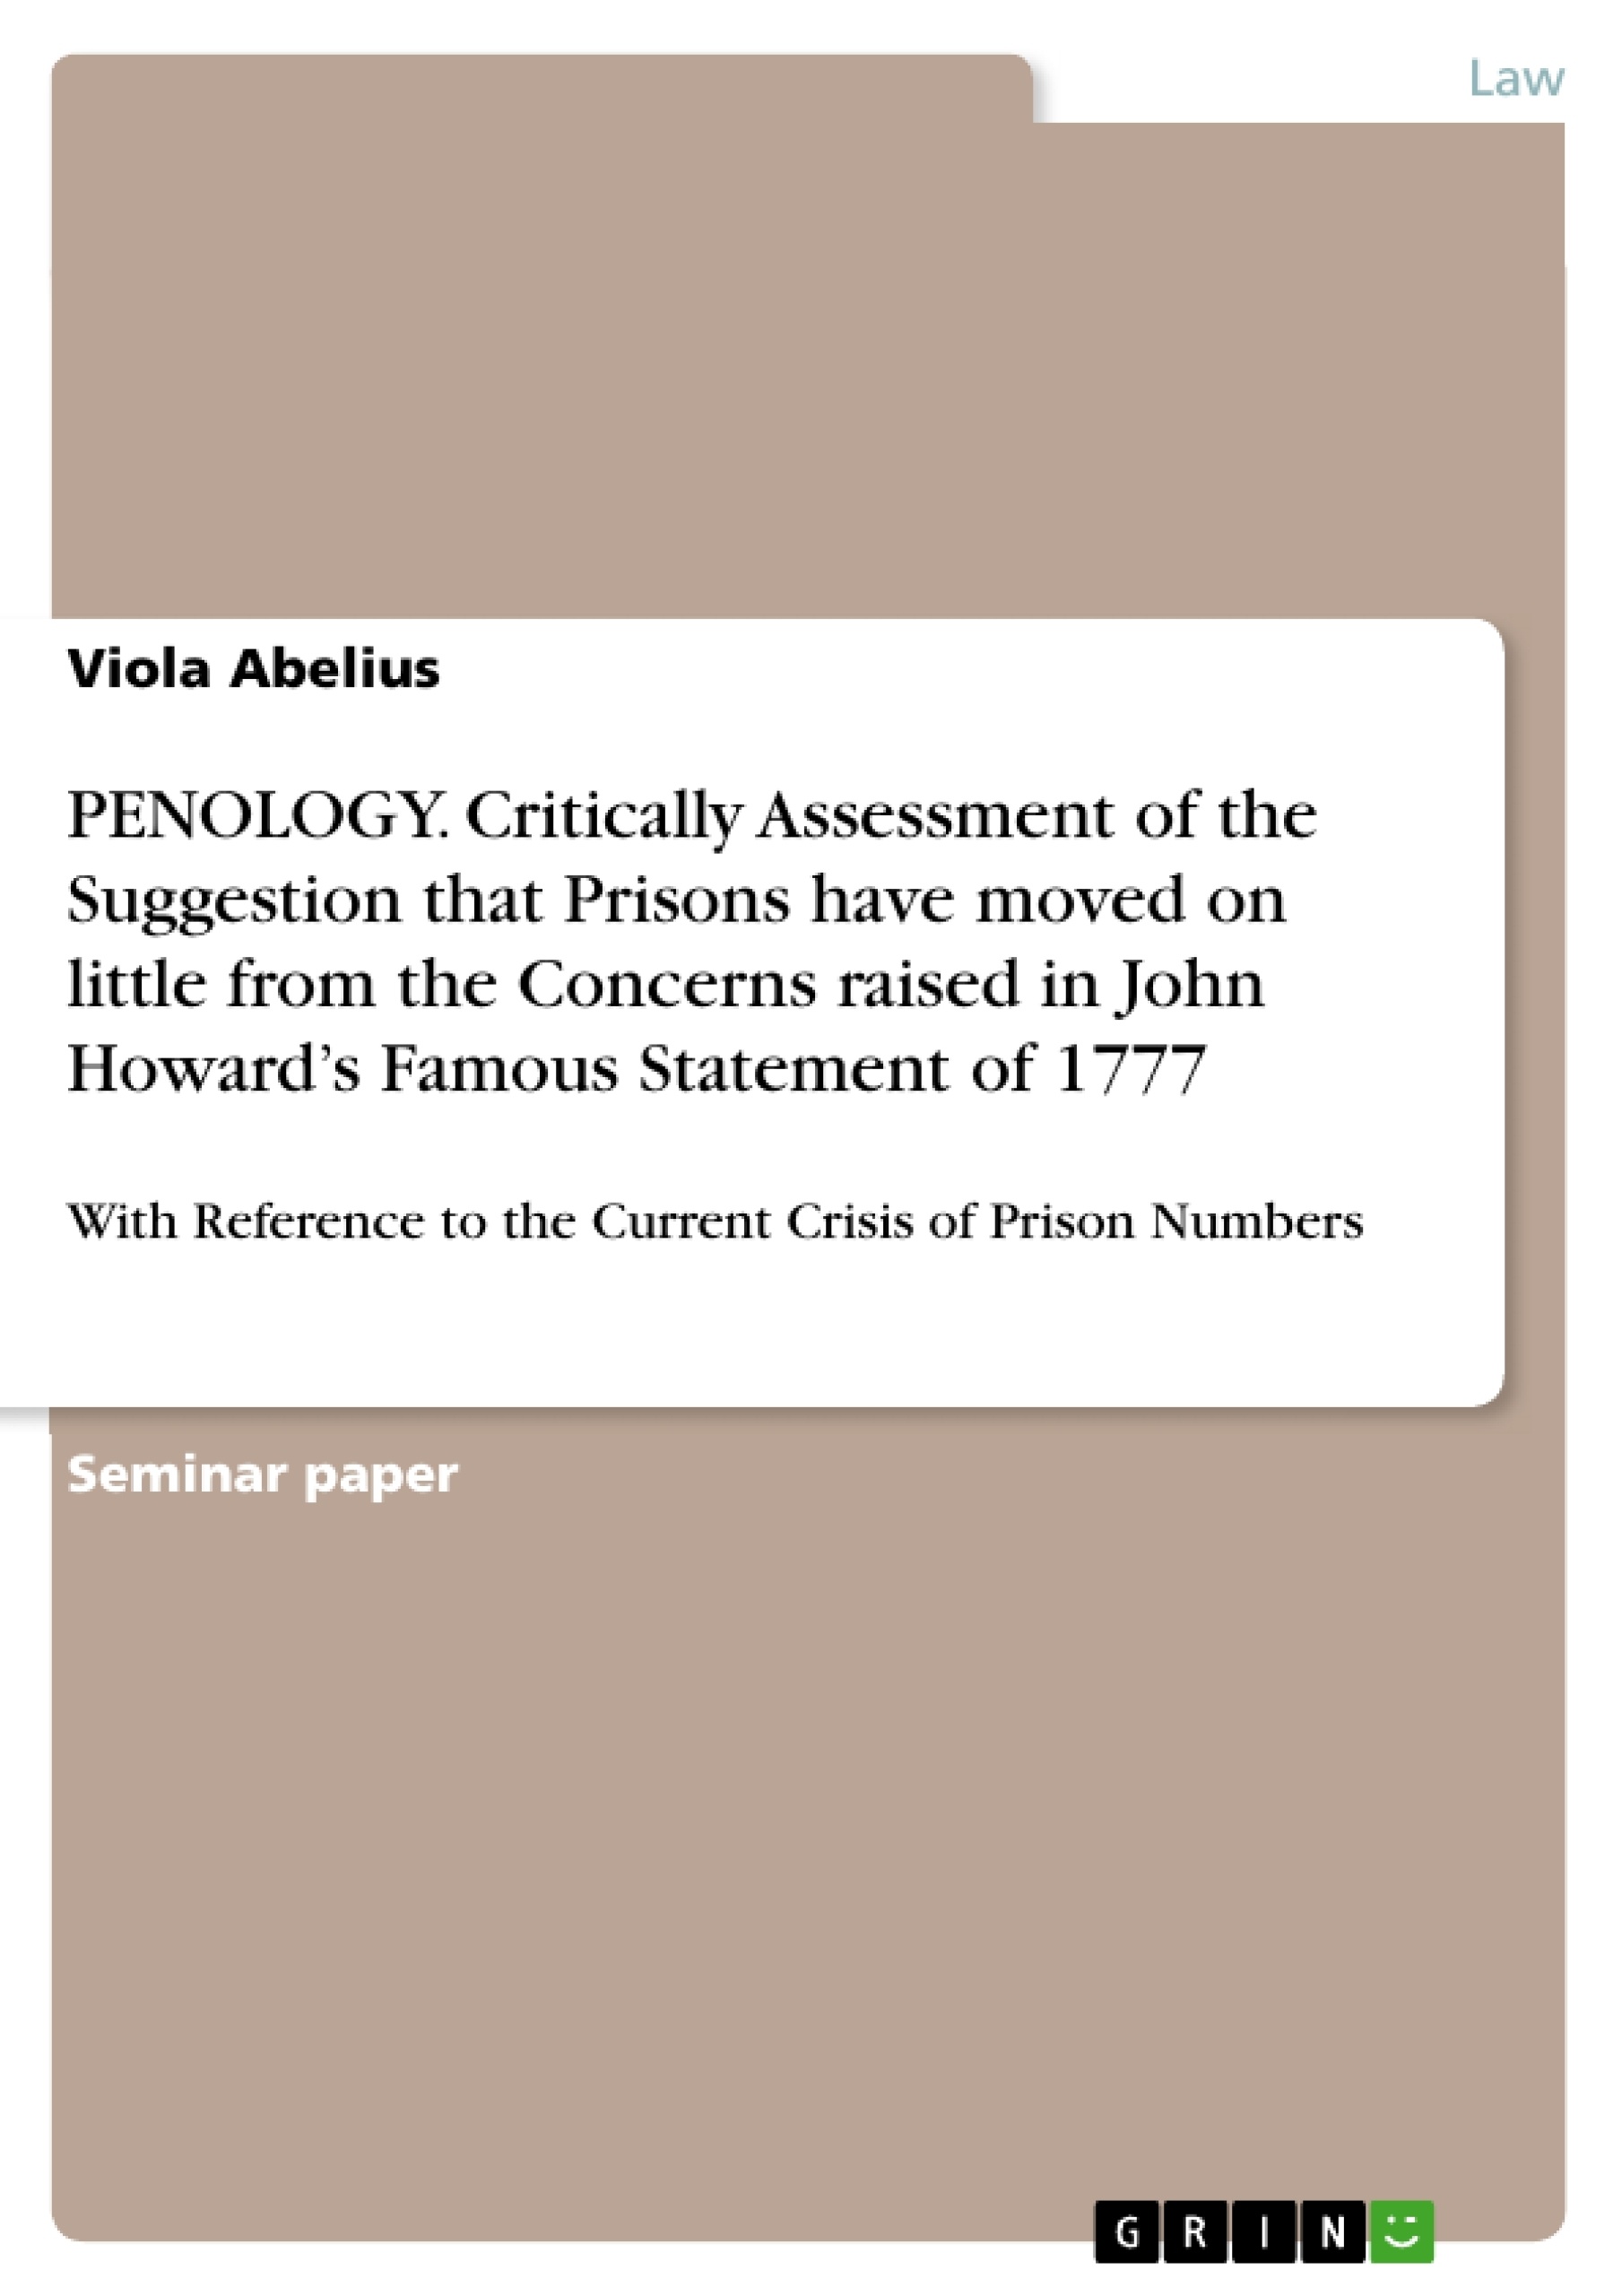 Titel: PENOLOGY. Critically Assessment of the Suggestion that Prisons have moved on little from the Concerns raised in John Howard’s Famous Statement of 1777